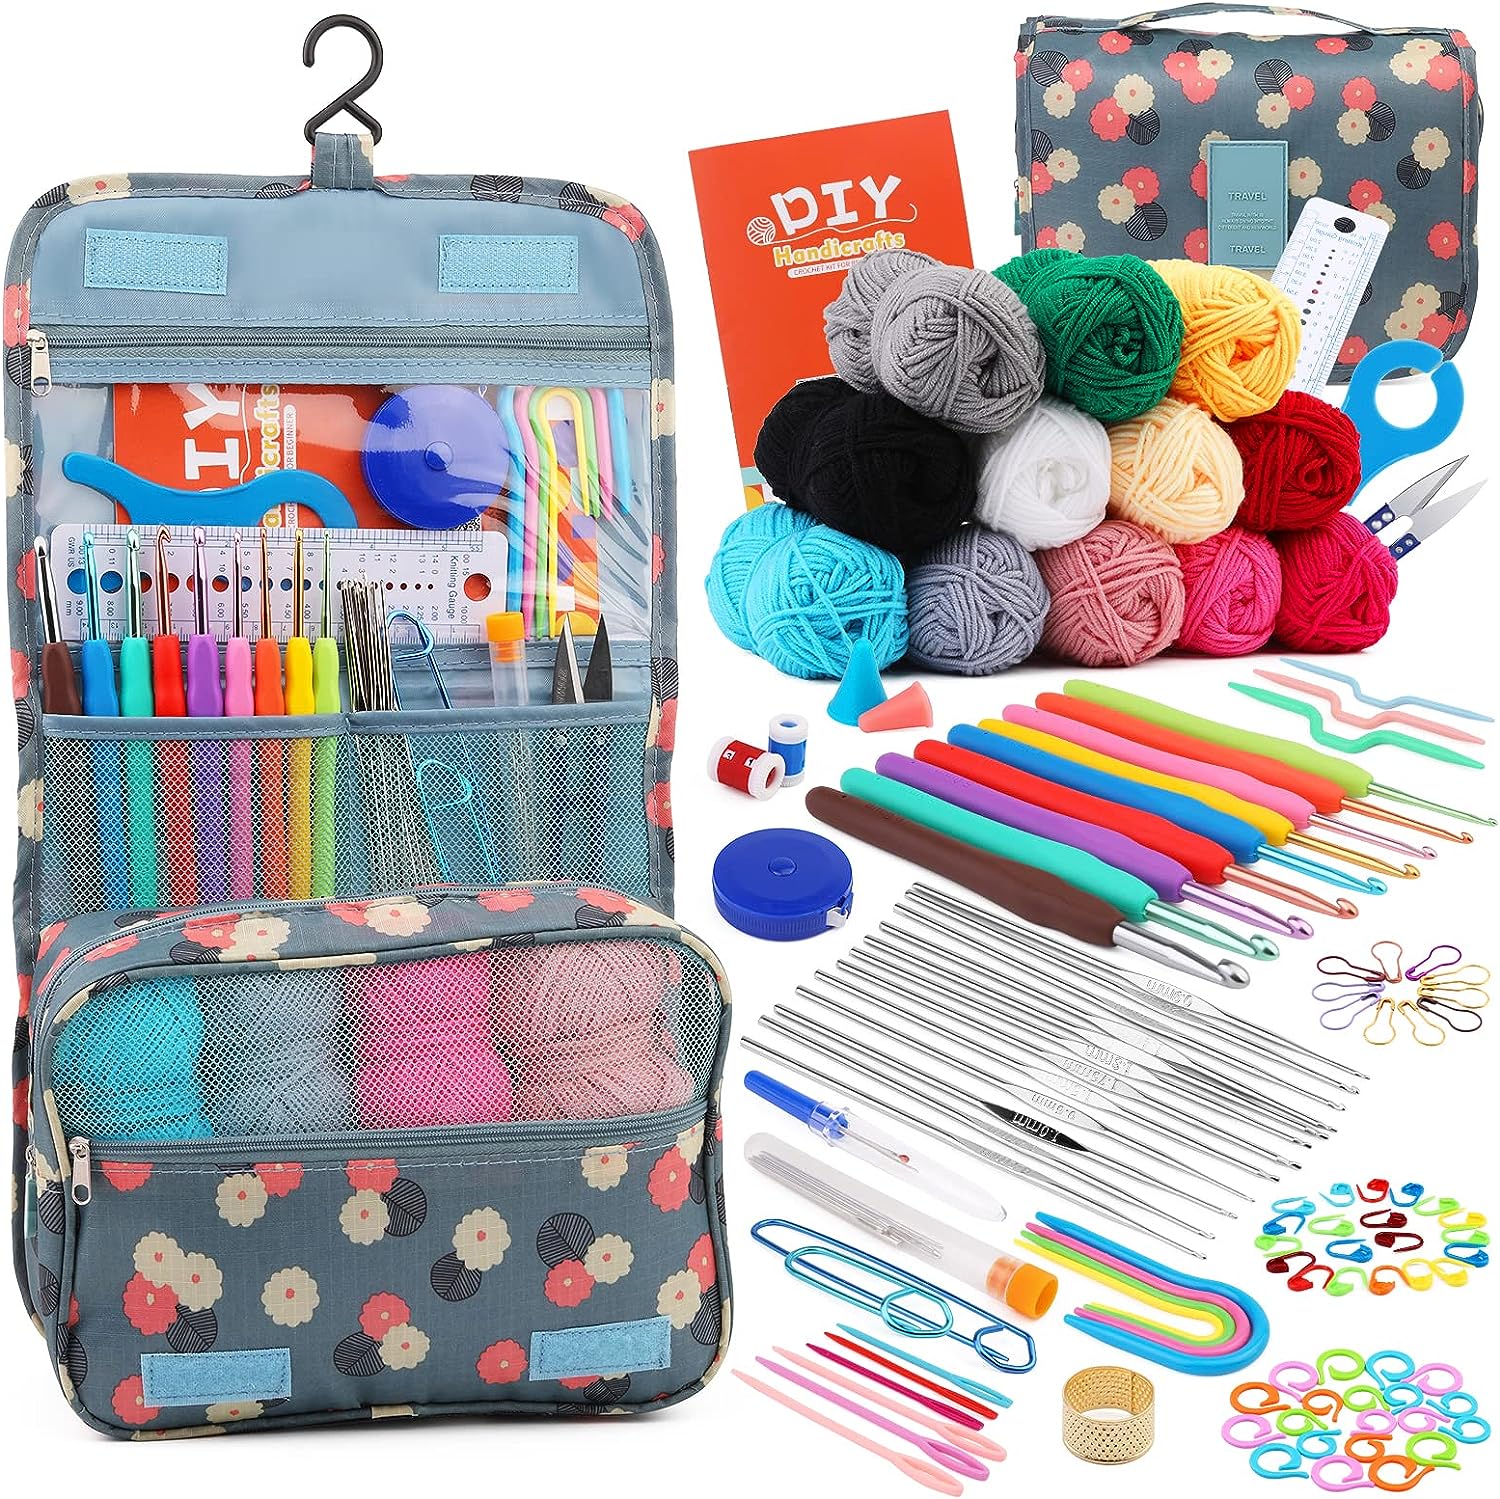 QSHQ Complete Crochet Kit for Beginners,130 Pcs Crochet Kit Including  Crochet Yarn, Ergonomic Crochet Hooks, and Crochet Accessories in Hangable  Storage Bag 